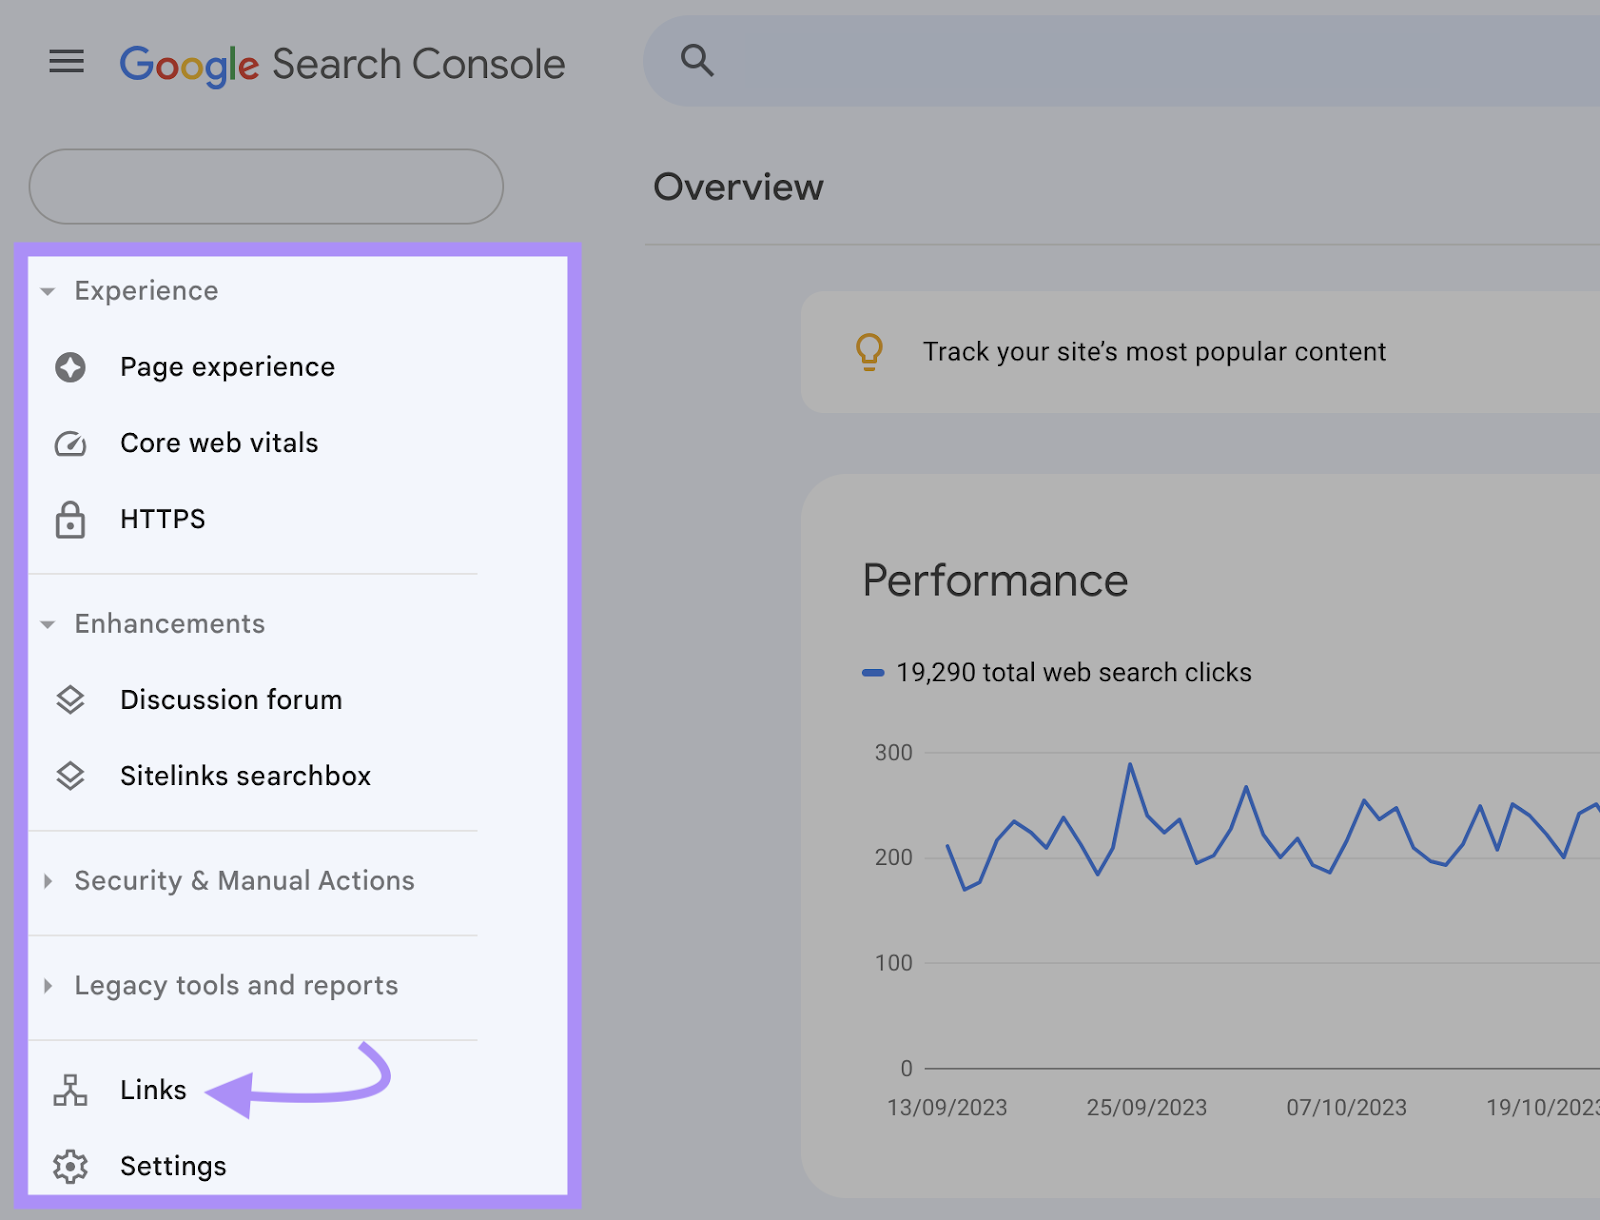 Navigating to “Links” in the Google Search Console menu